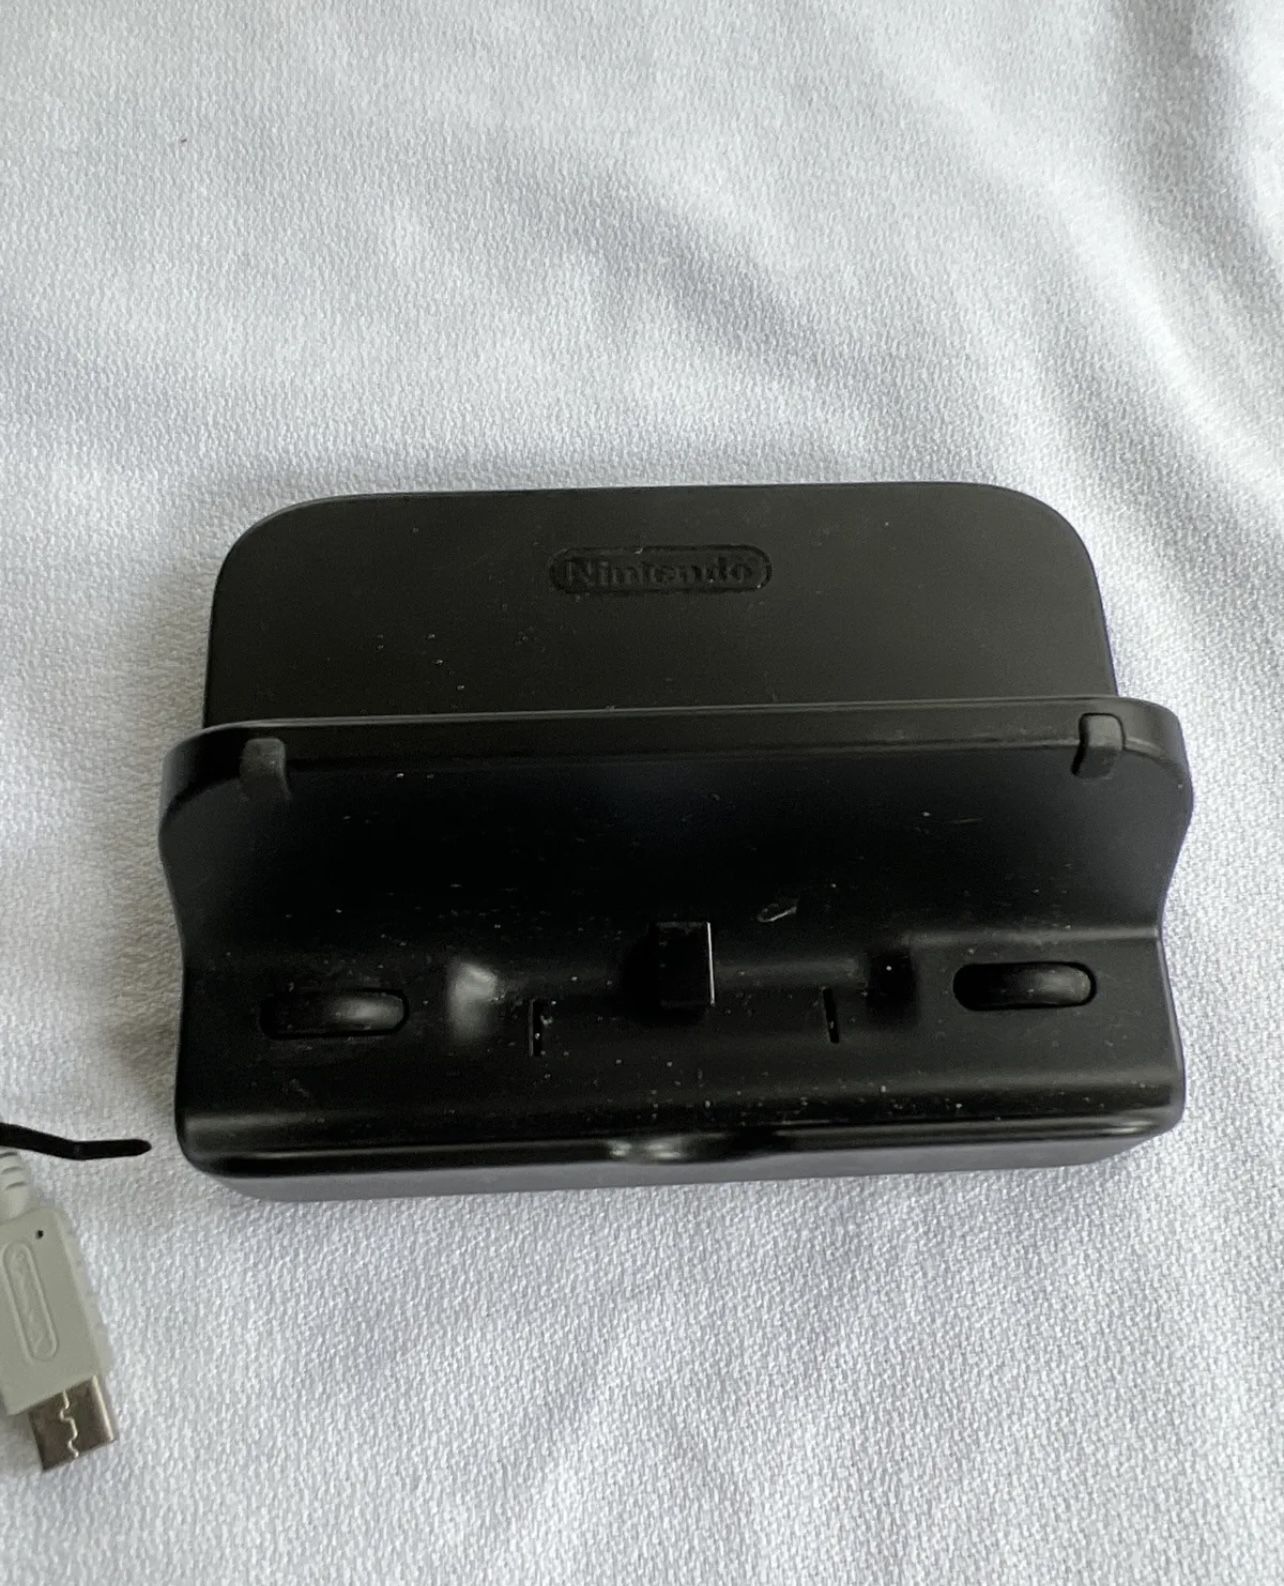 Official Nintendo Wii U Gamepad Charger Dock Charge Station Cradle WUP-014 OEM 